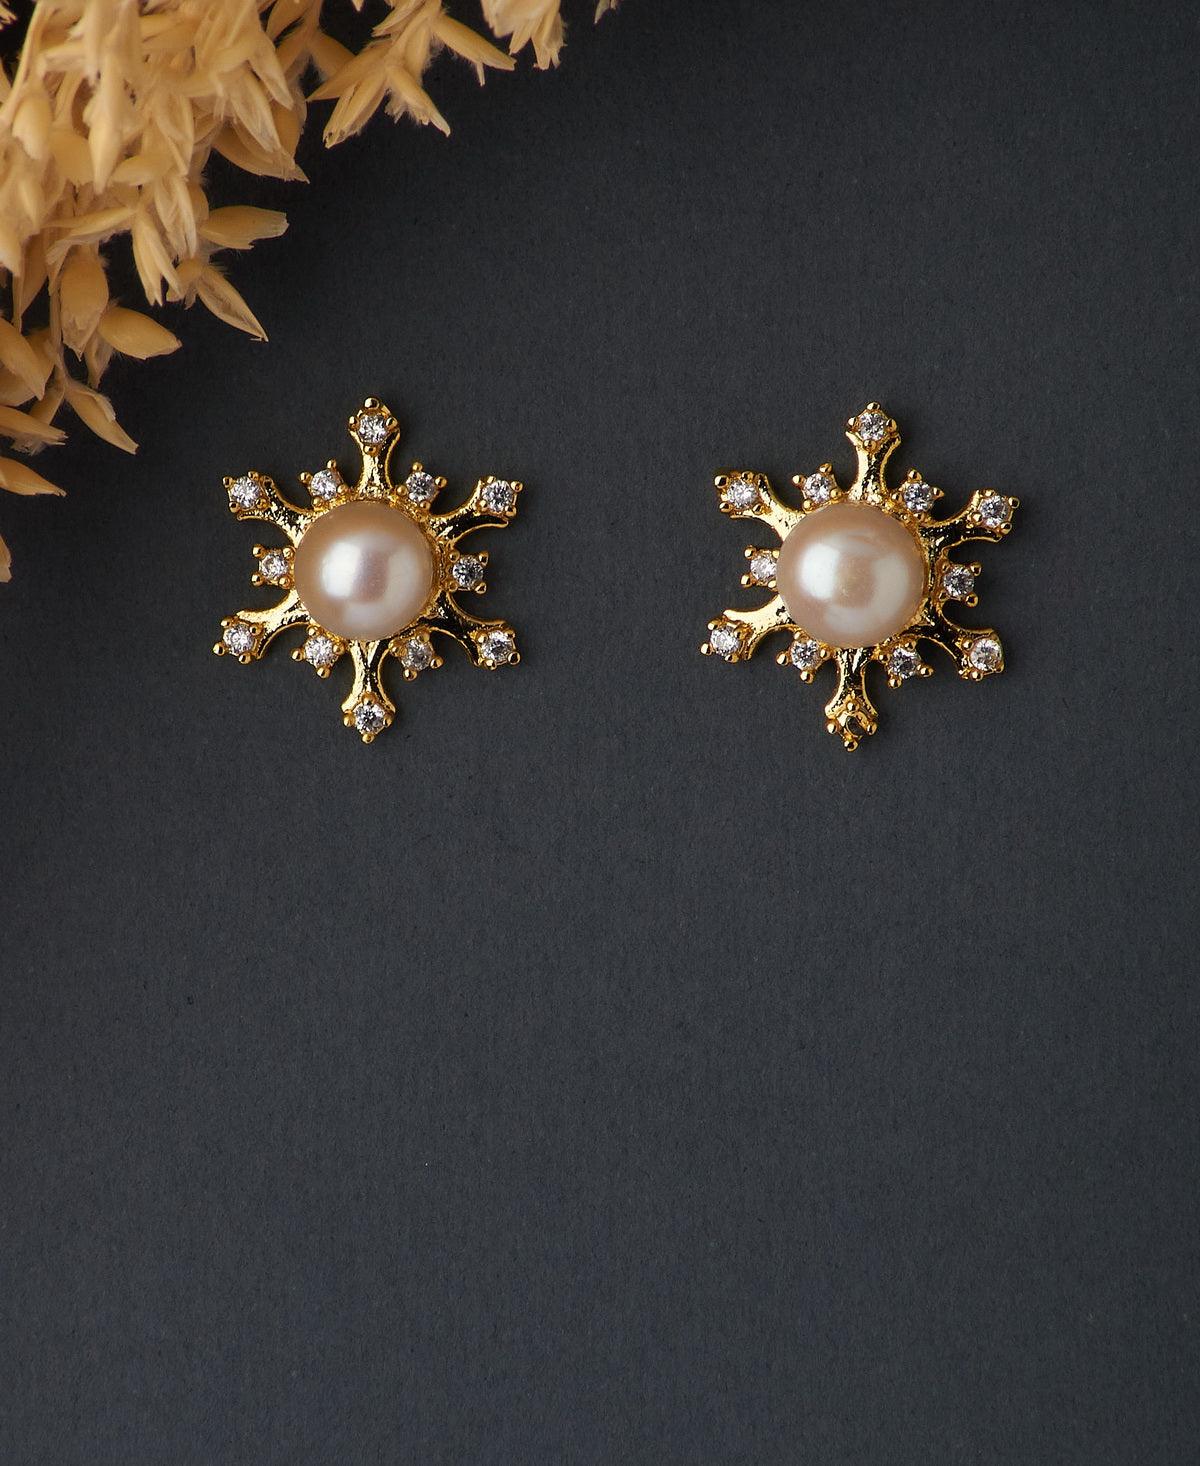 Buy Gold Plated Kundan Earrings by Do Taara Online at Aza Fashions.